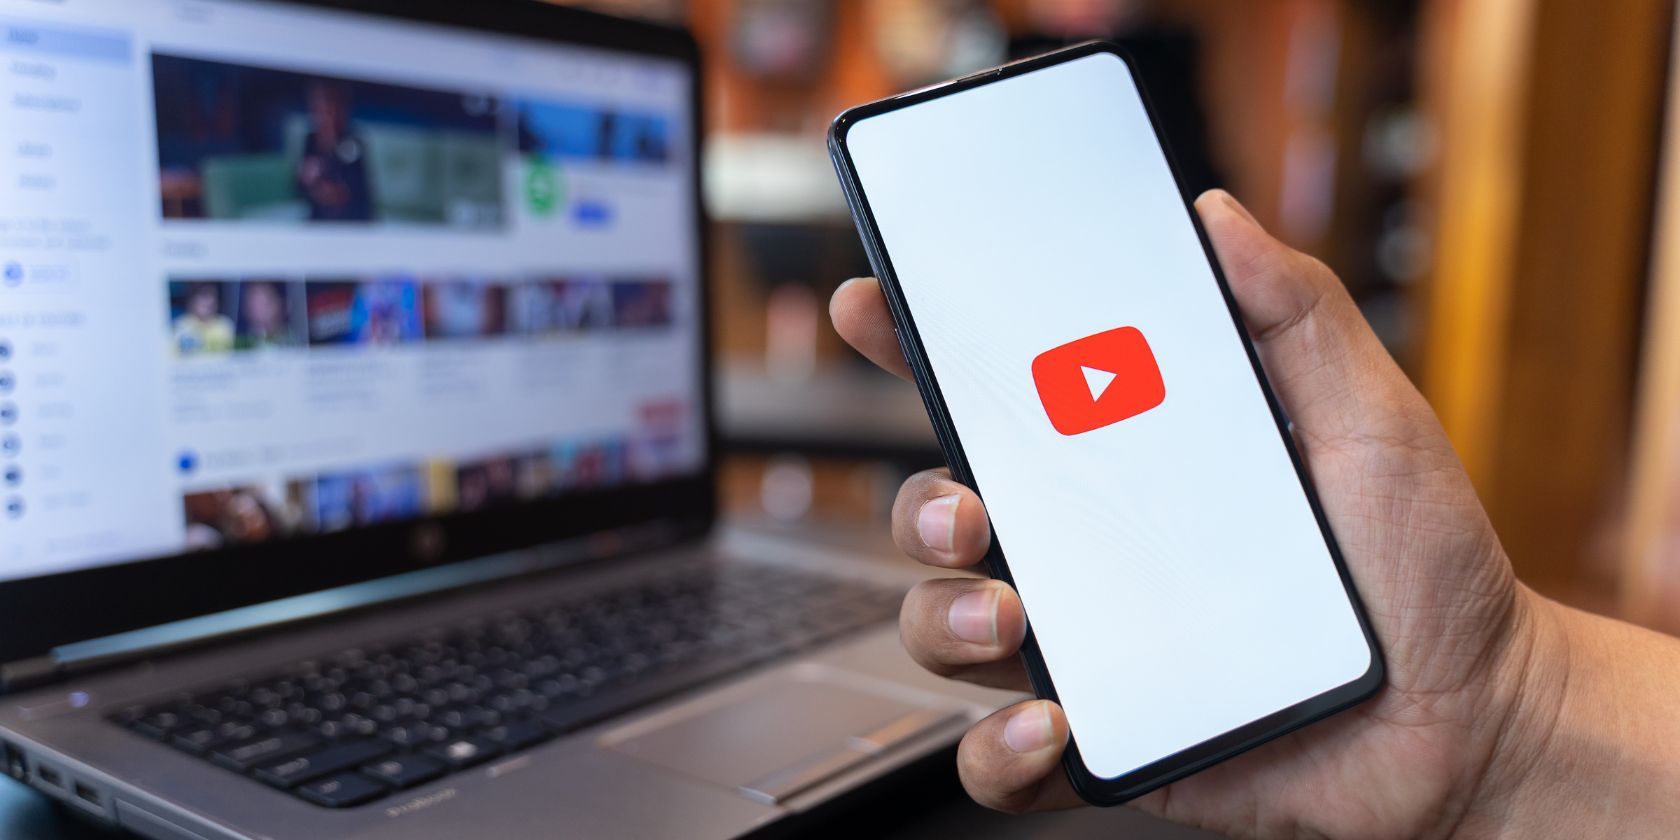 How to View and Manage Your YouTube Watch History